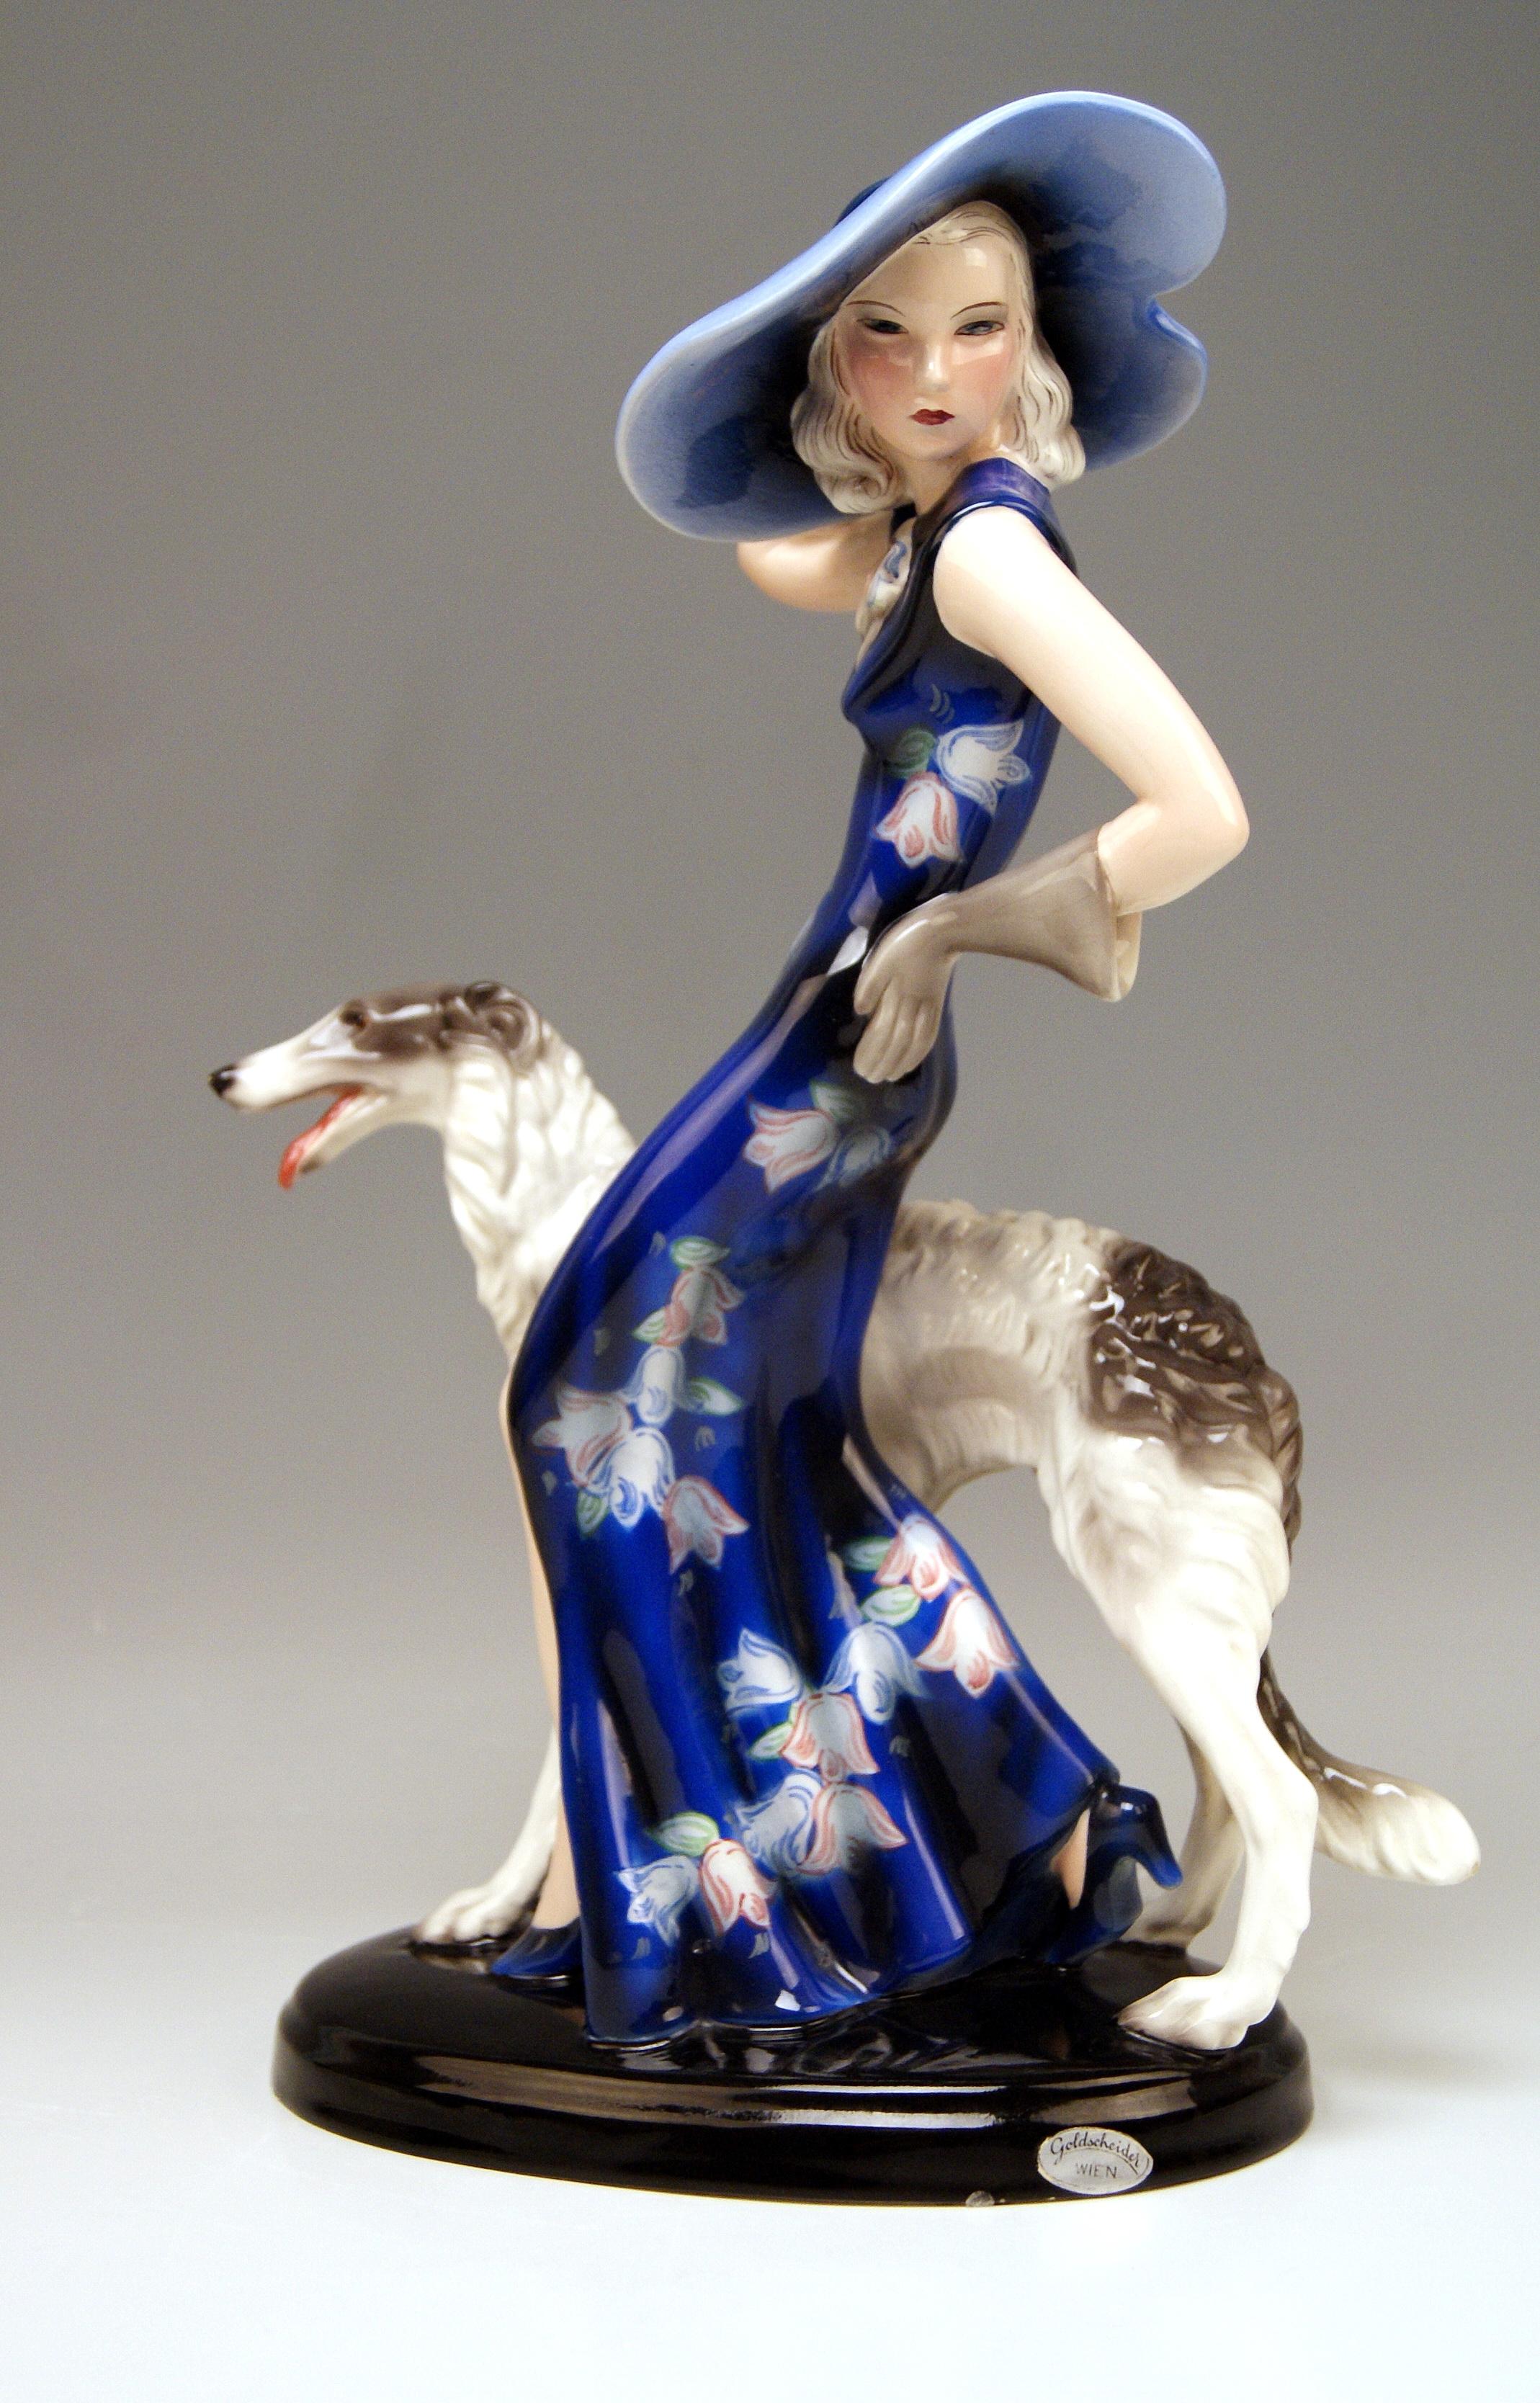 Elegant Lady Wearing A Hat with Broad Brim, Accompanied by A Borzoi Dog

Design:
Klàra (Claire) Herczeg / Weiss (1906-1997). Model 7367 was created 1935 / 36. 
Made circa 1936.

Hallmarked:
Model Number 7367 / 41 / 19
The following mark is